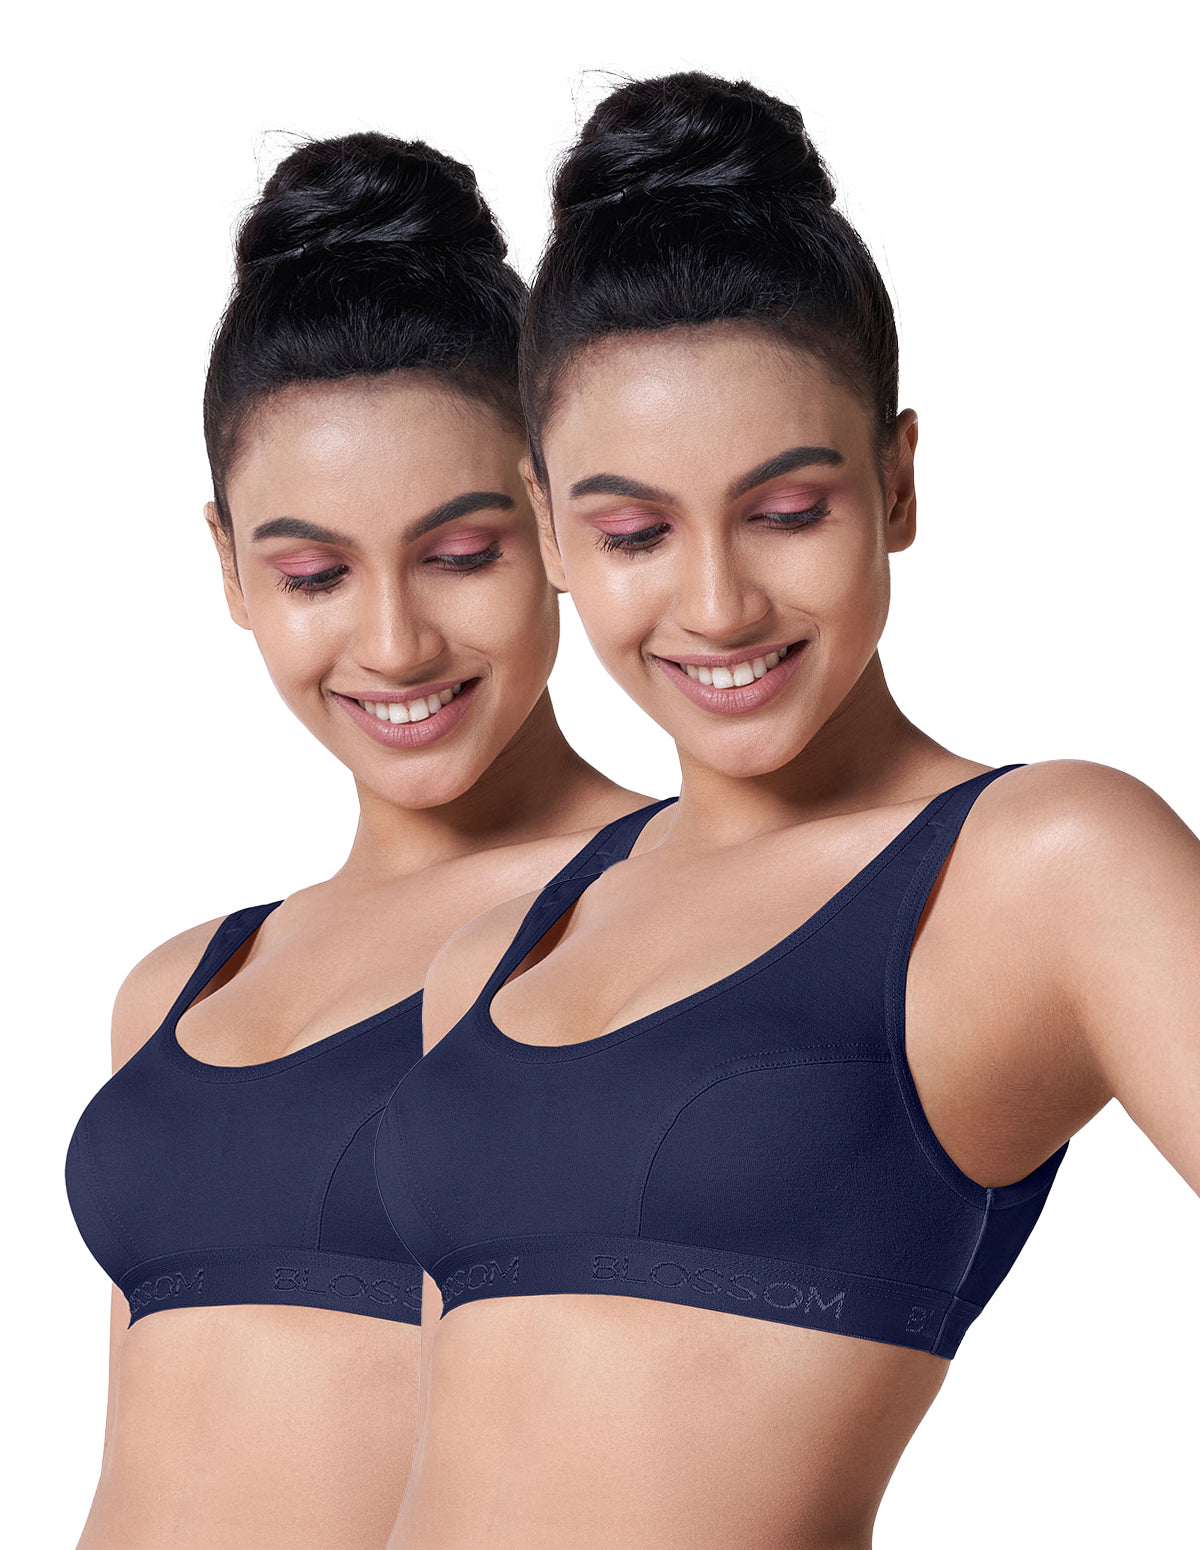 blossom-sporty bra-Pack of 2-navy blue1-Sports collection-utility based bra